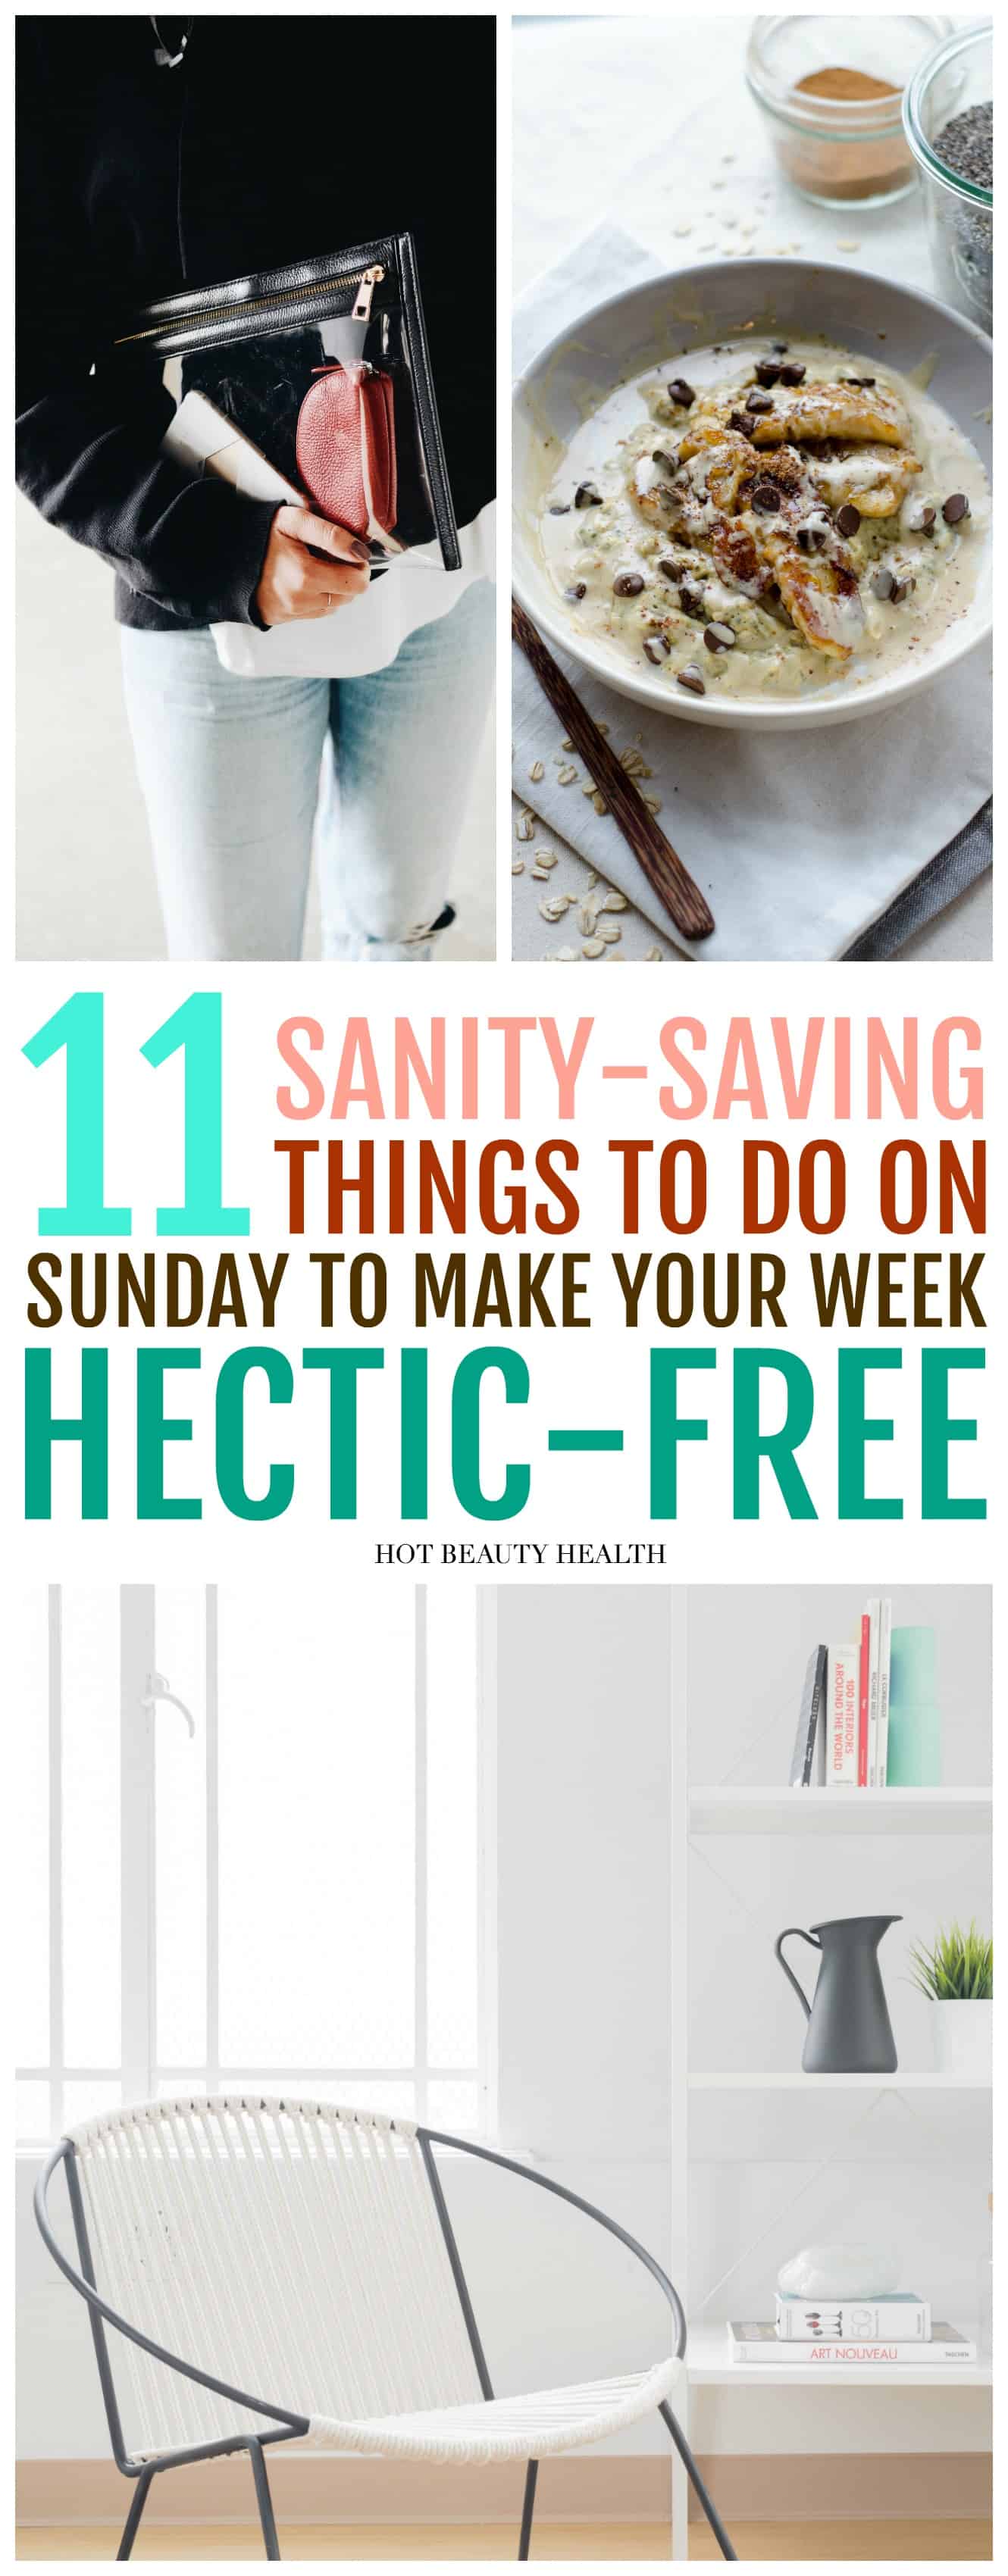 Here are 11 things to do on Sunday to have a more productive and organized week! These AWESOME tips will make life so much easier and Mondays less hectic! Click pin for great ways to meal prep, have some me time, staying organized, and more simple tasks to make your life so much simpler and stress-free!